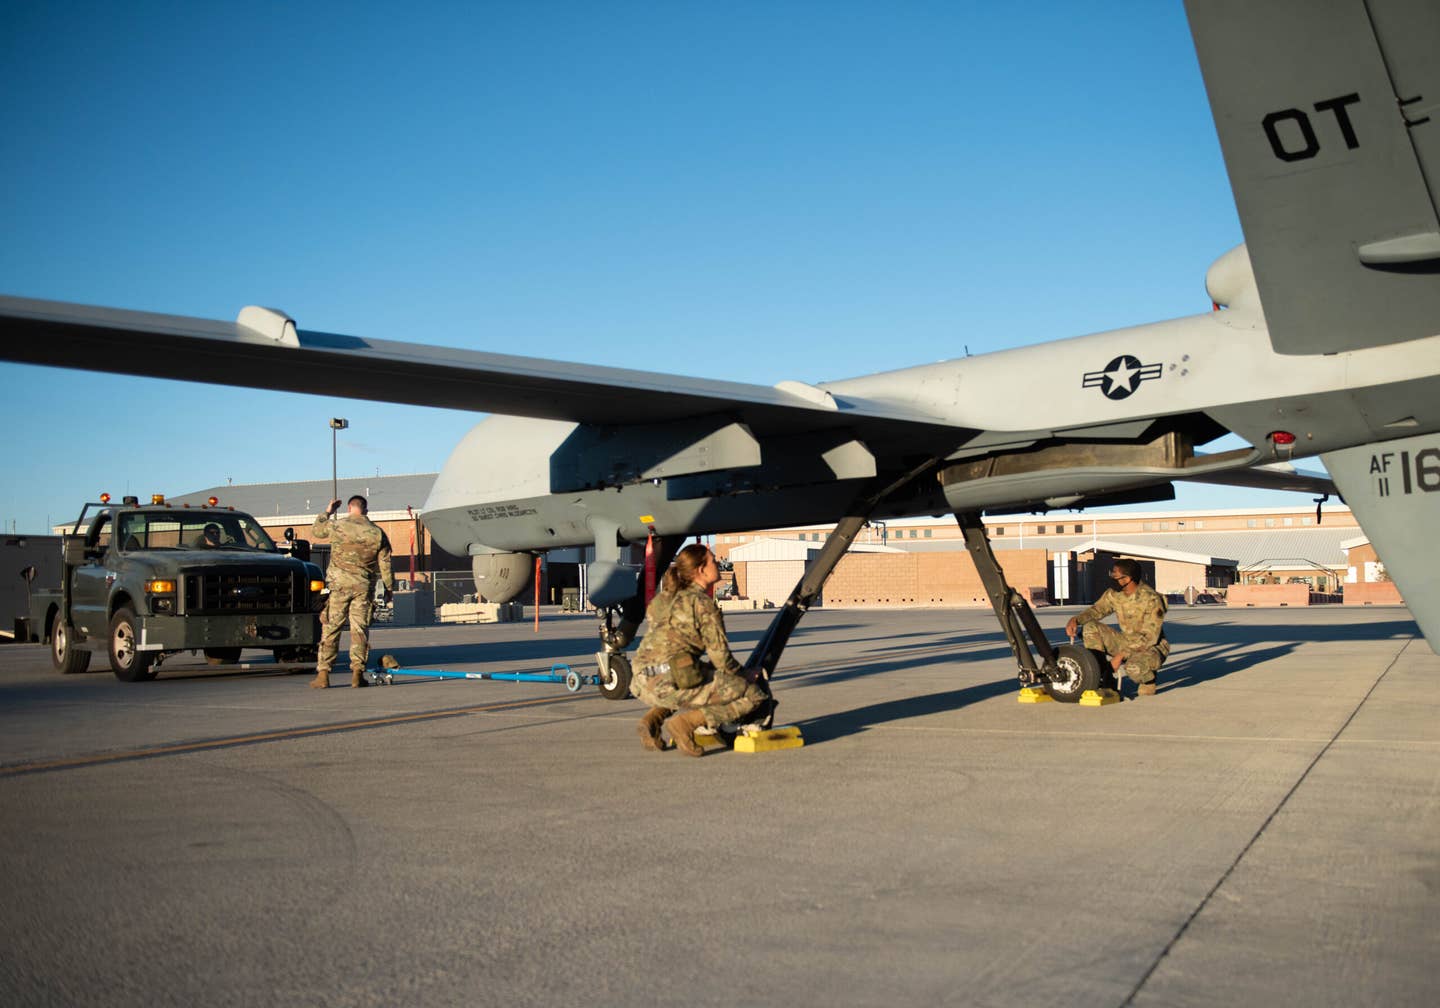 U.S. Air Force Airmen assigned to the 432d Maintenance Squadron prepare the MQ-9 to be attached to the tow truck so it can be towed into the hanger on the flightline at Creech Air Force Base, Nov. 23, 2021. <em>Credit: U.S. Air Force photo by Airman 1st Class Kristal Munguia</em>